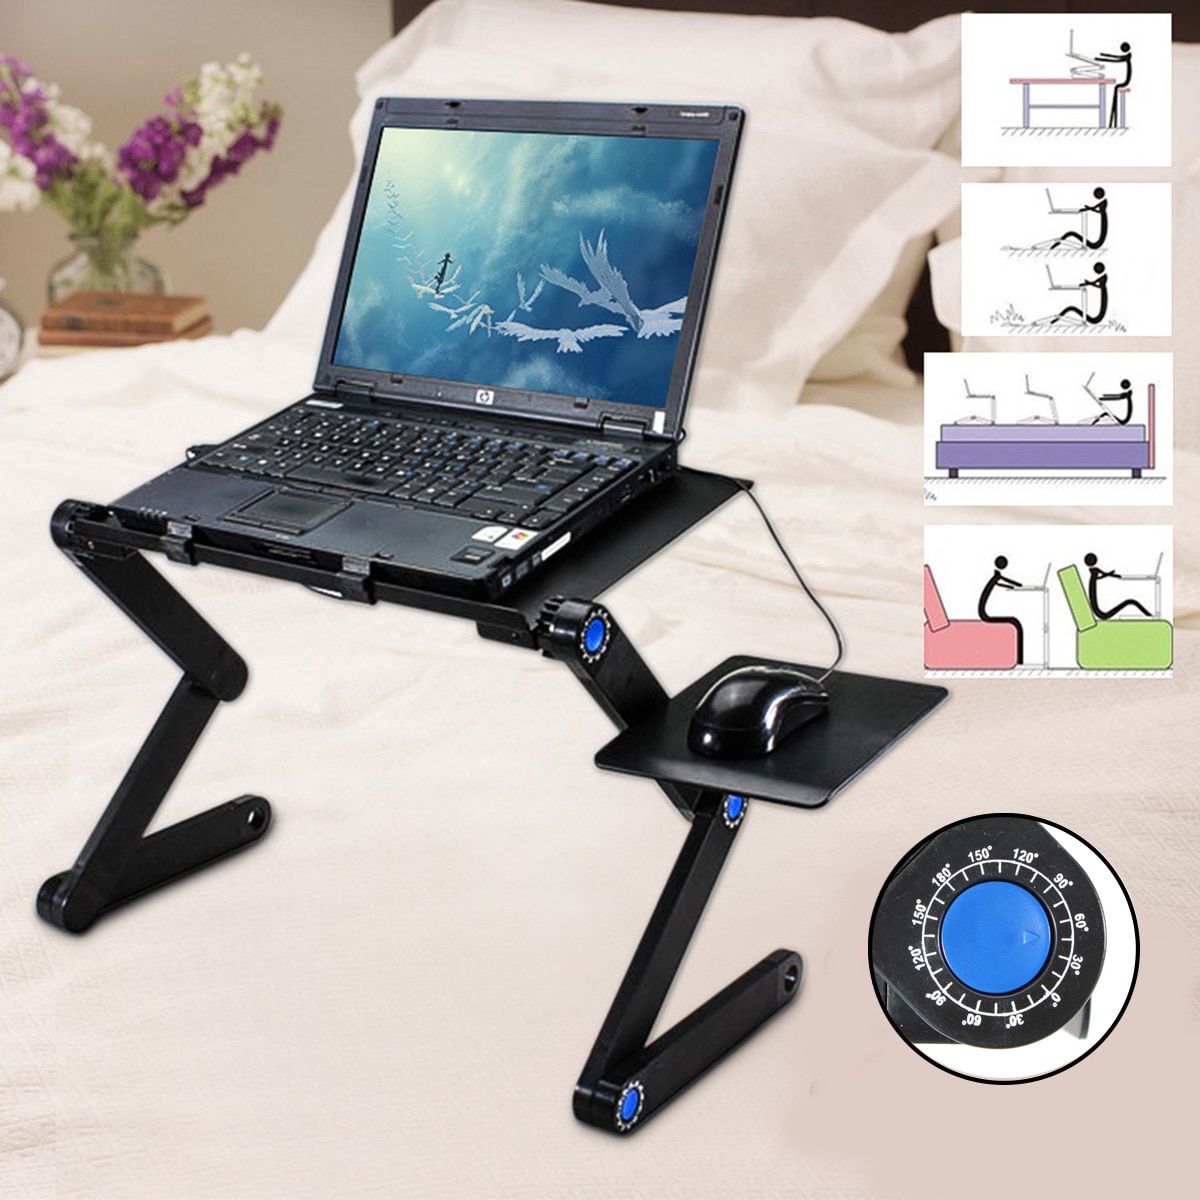 Foldable laptop stand